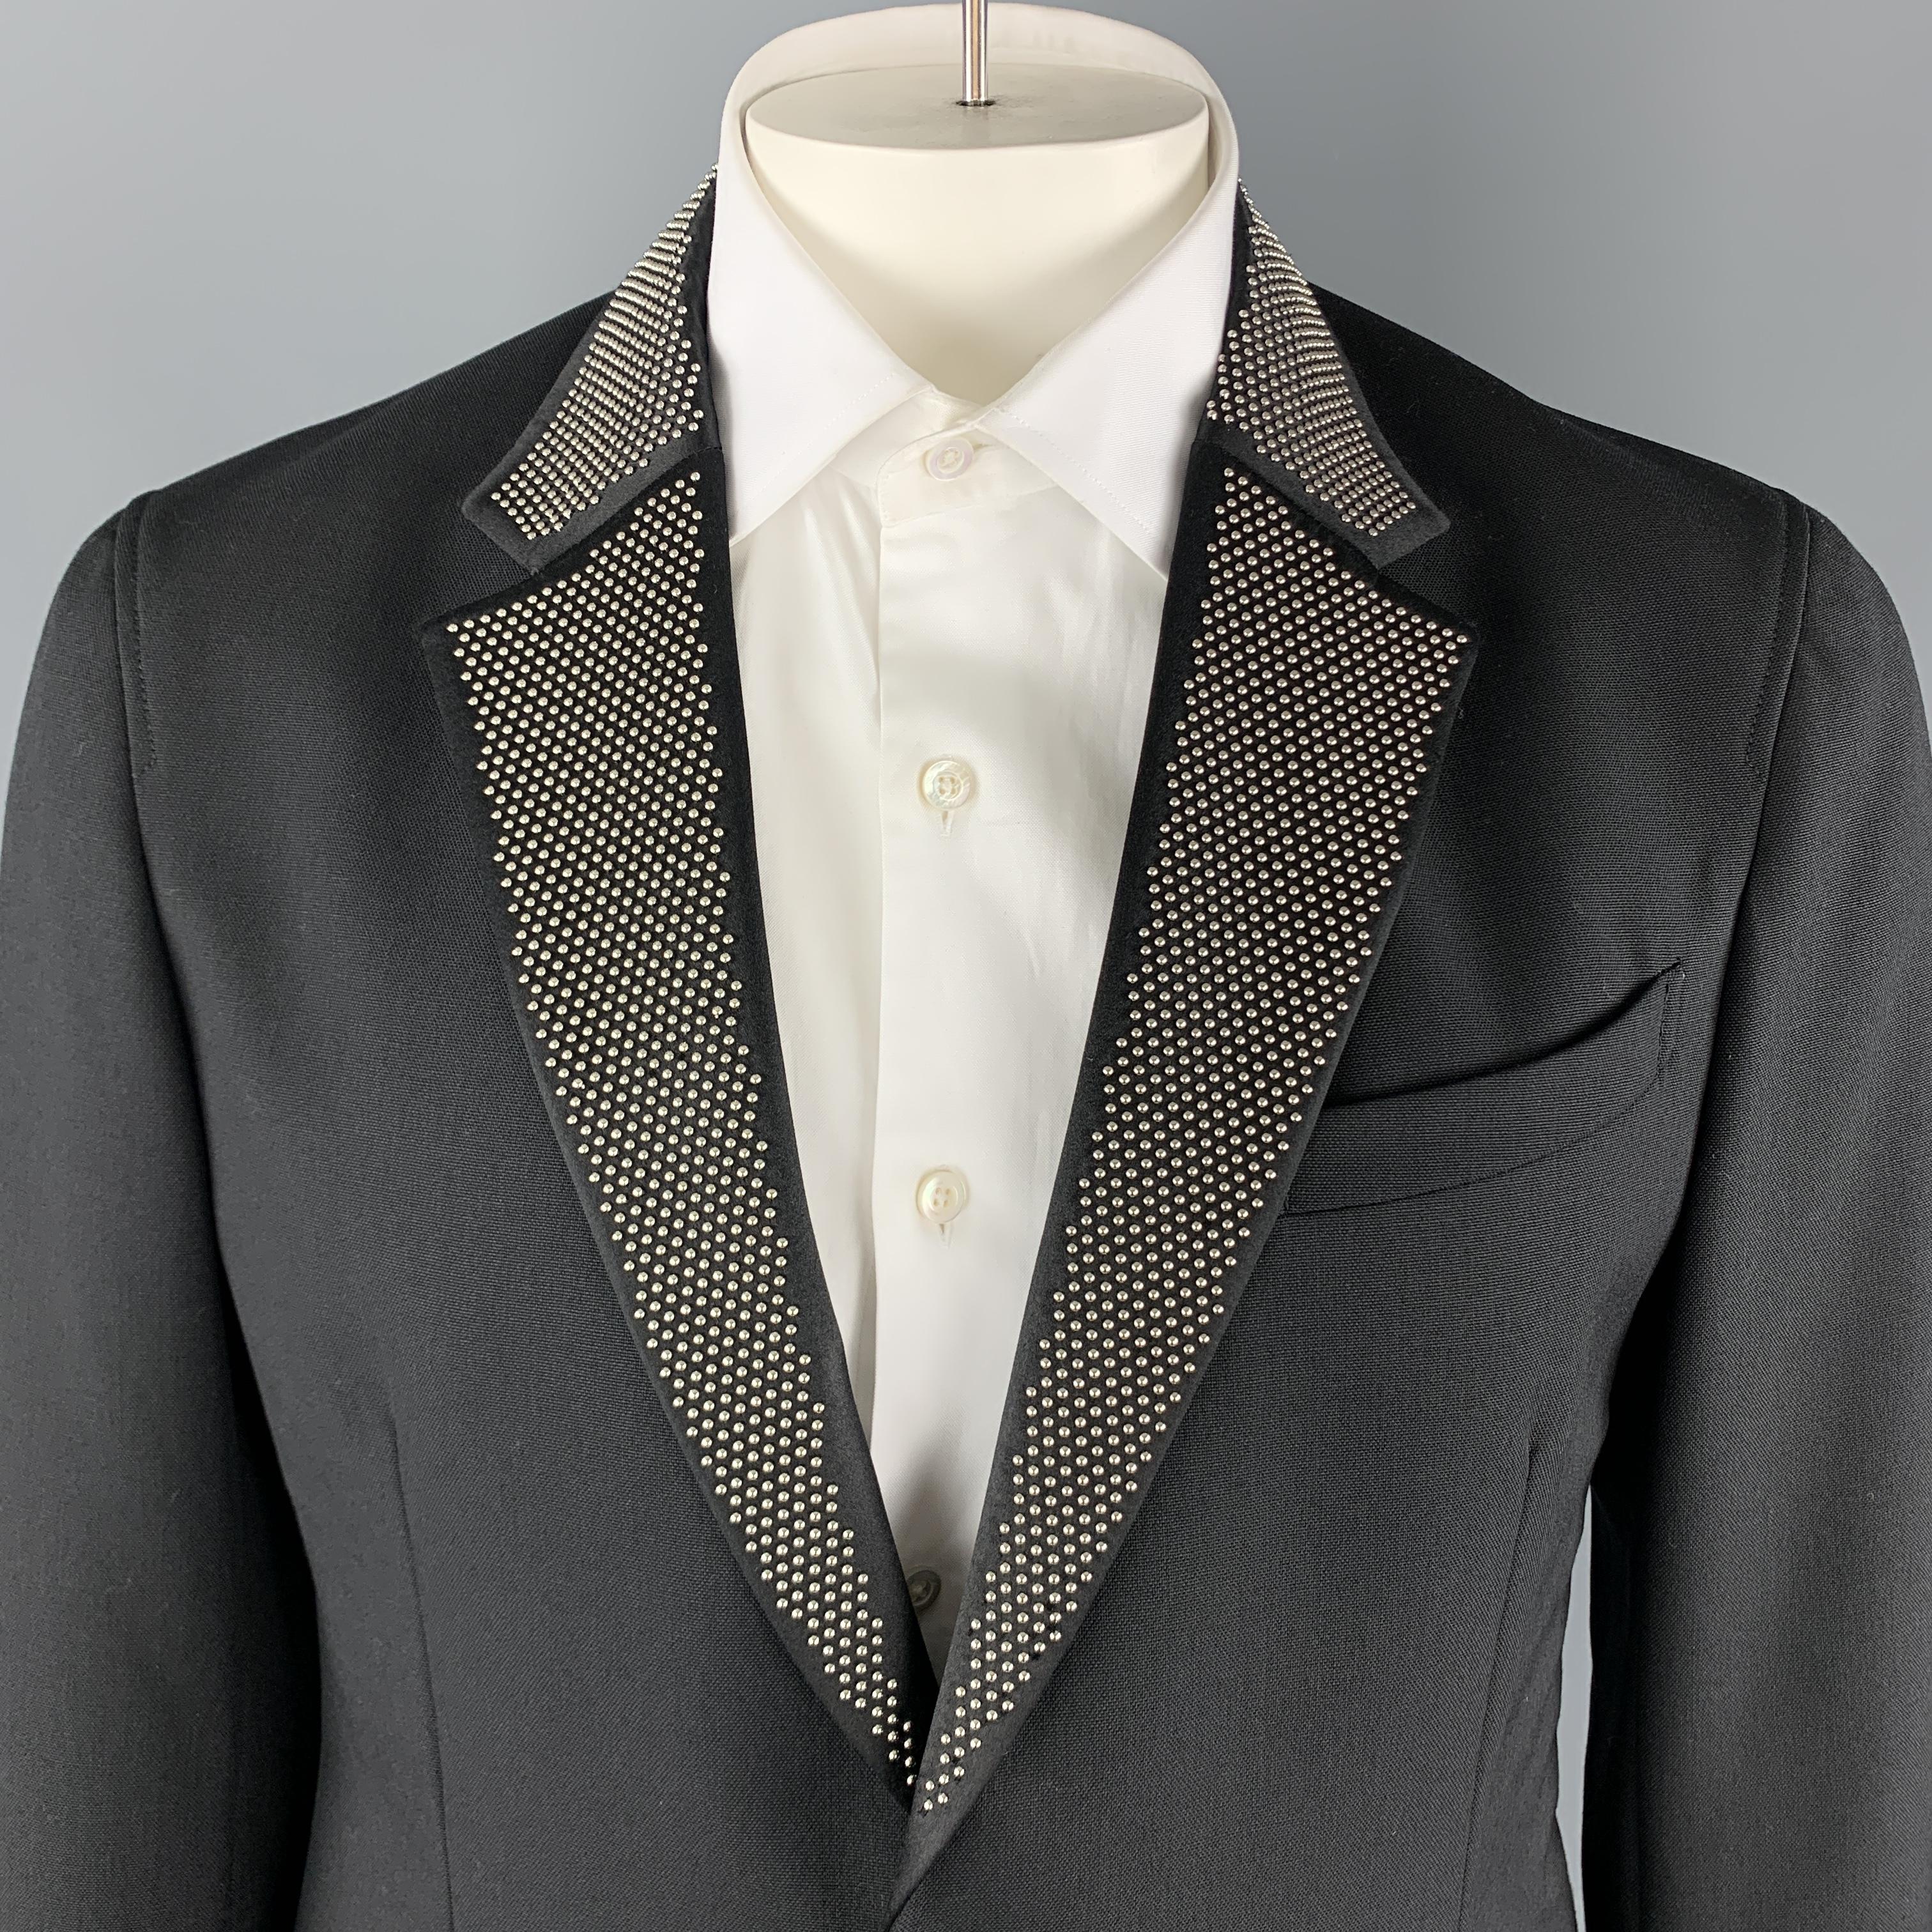 ALEXANDER MCQUEEN Sport Coat comes in a solid black wool / mohair material, with a studded lapel, two buttons at closure, slit and zip pockets, unbuttoned cuffs and a single vent at back, unlined. Made in Italy.

Excellent Pre-Owned